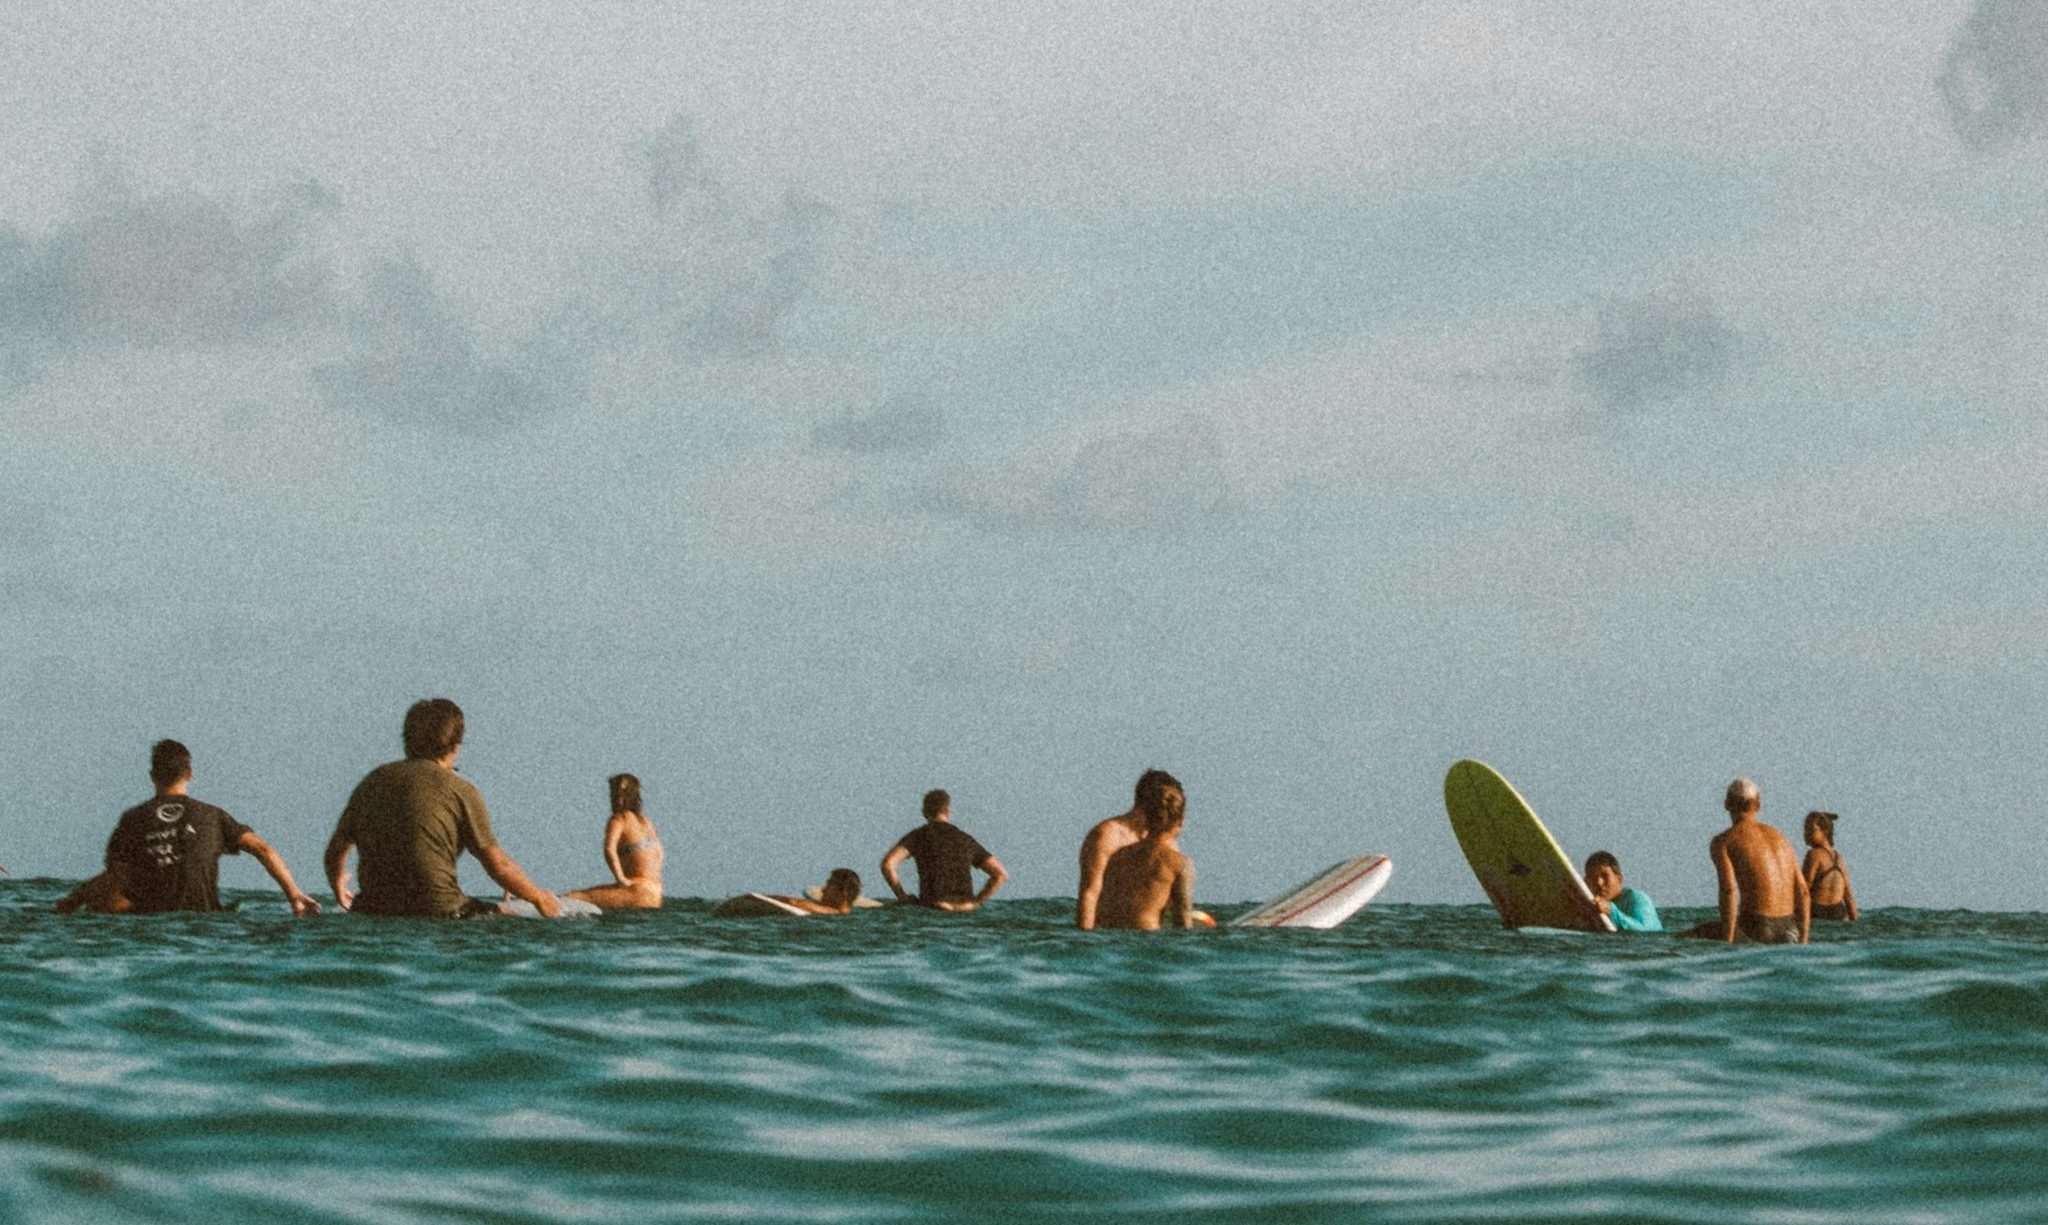 Surfers in the lineup